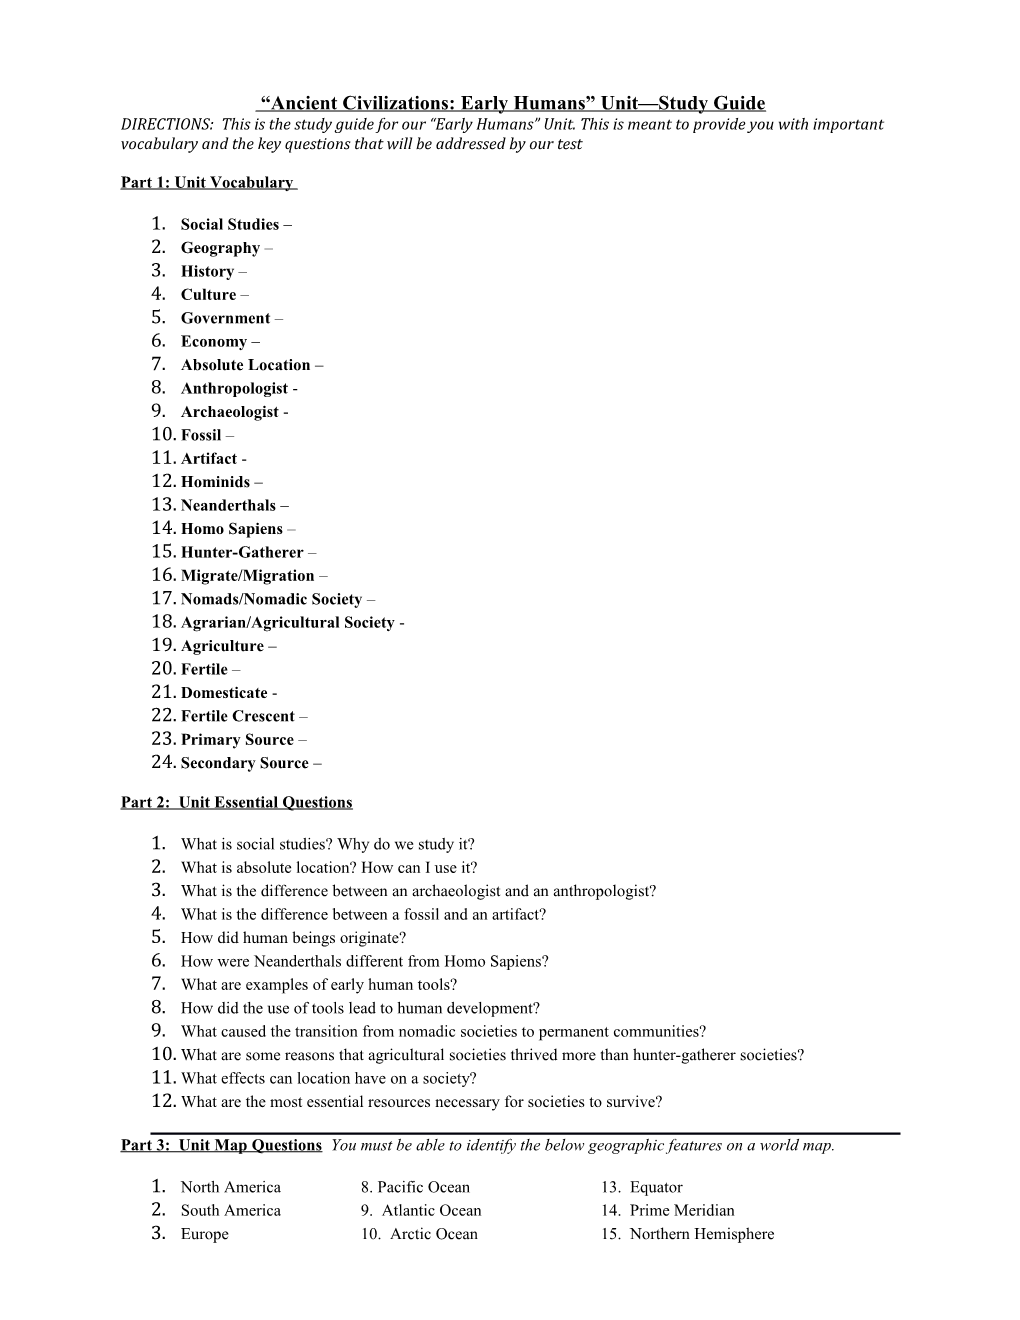 Ancient Civilizations: Early Humans Unit Study Guide